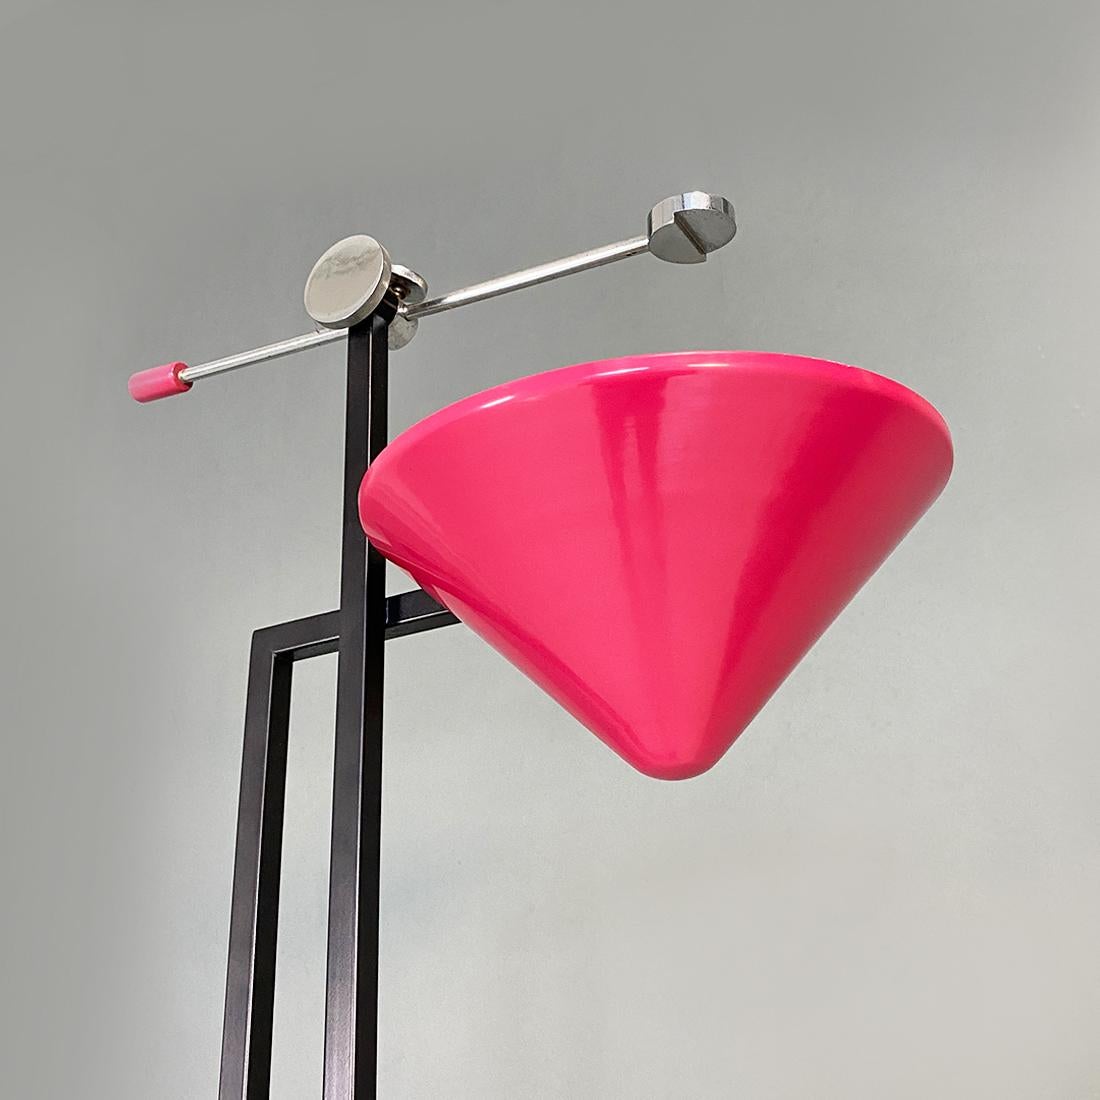 Italian Modern Metal Structure and Magenta Conical Diffuser Floor Lamp, 1980s For Sale 1